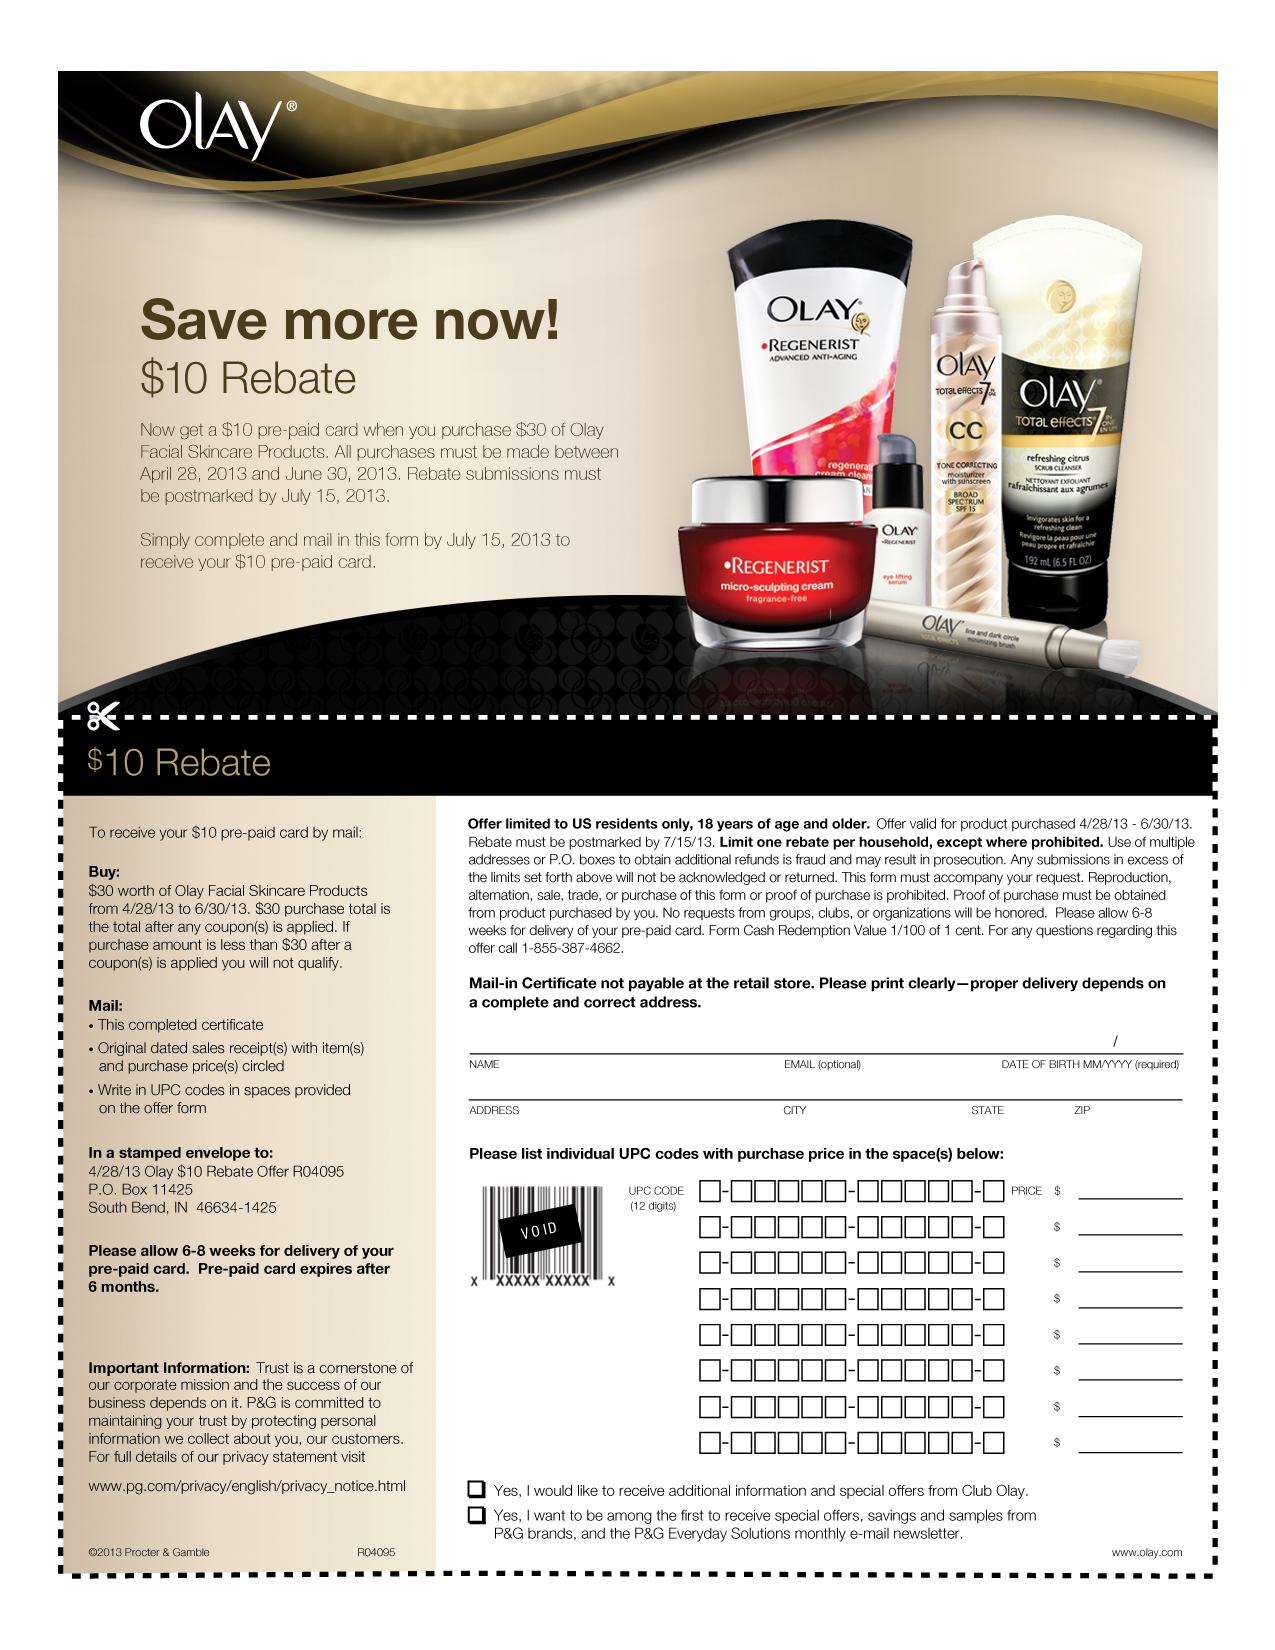 olay-rebate-get-10-back-when-you-spend-30-hot-drug-store-deals